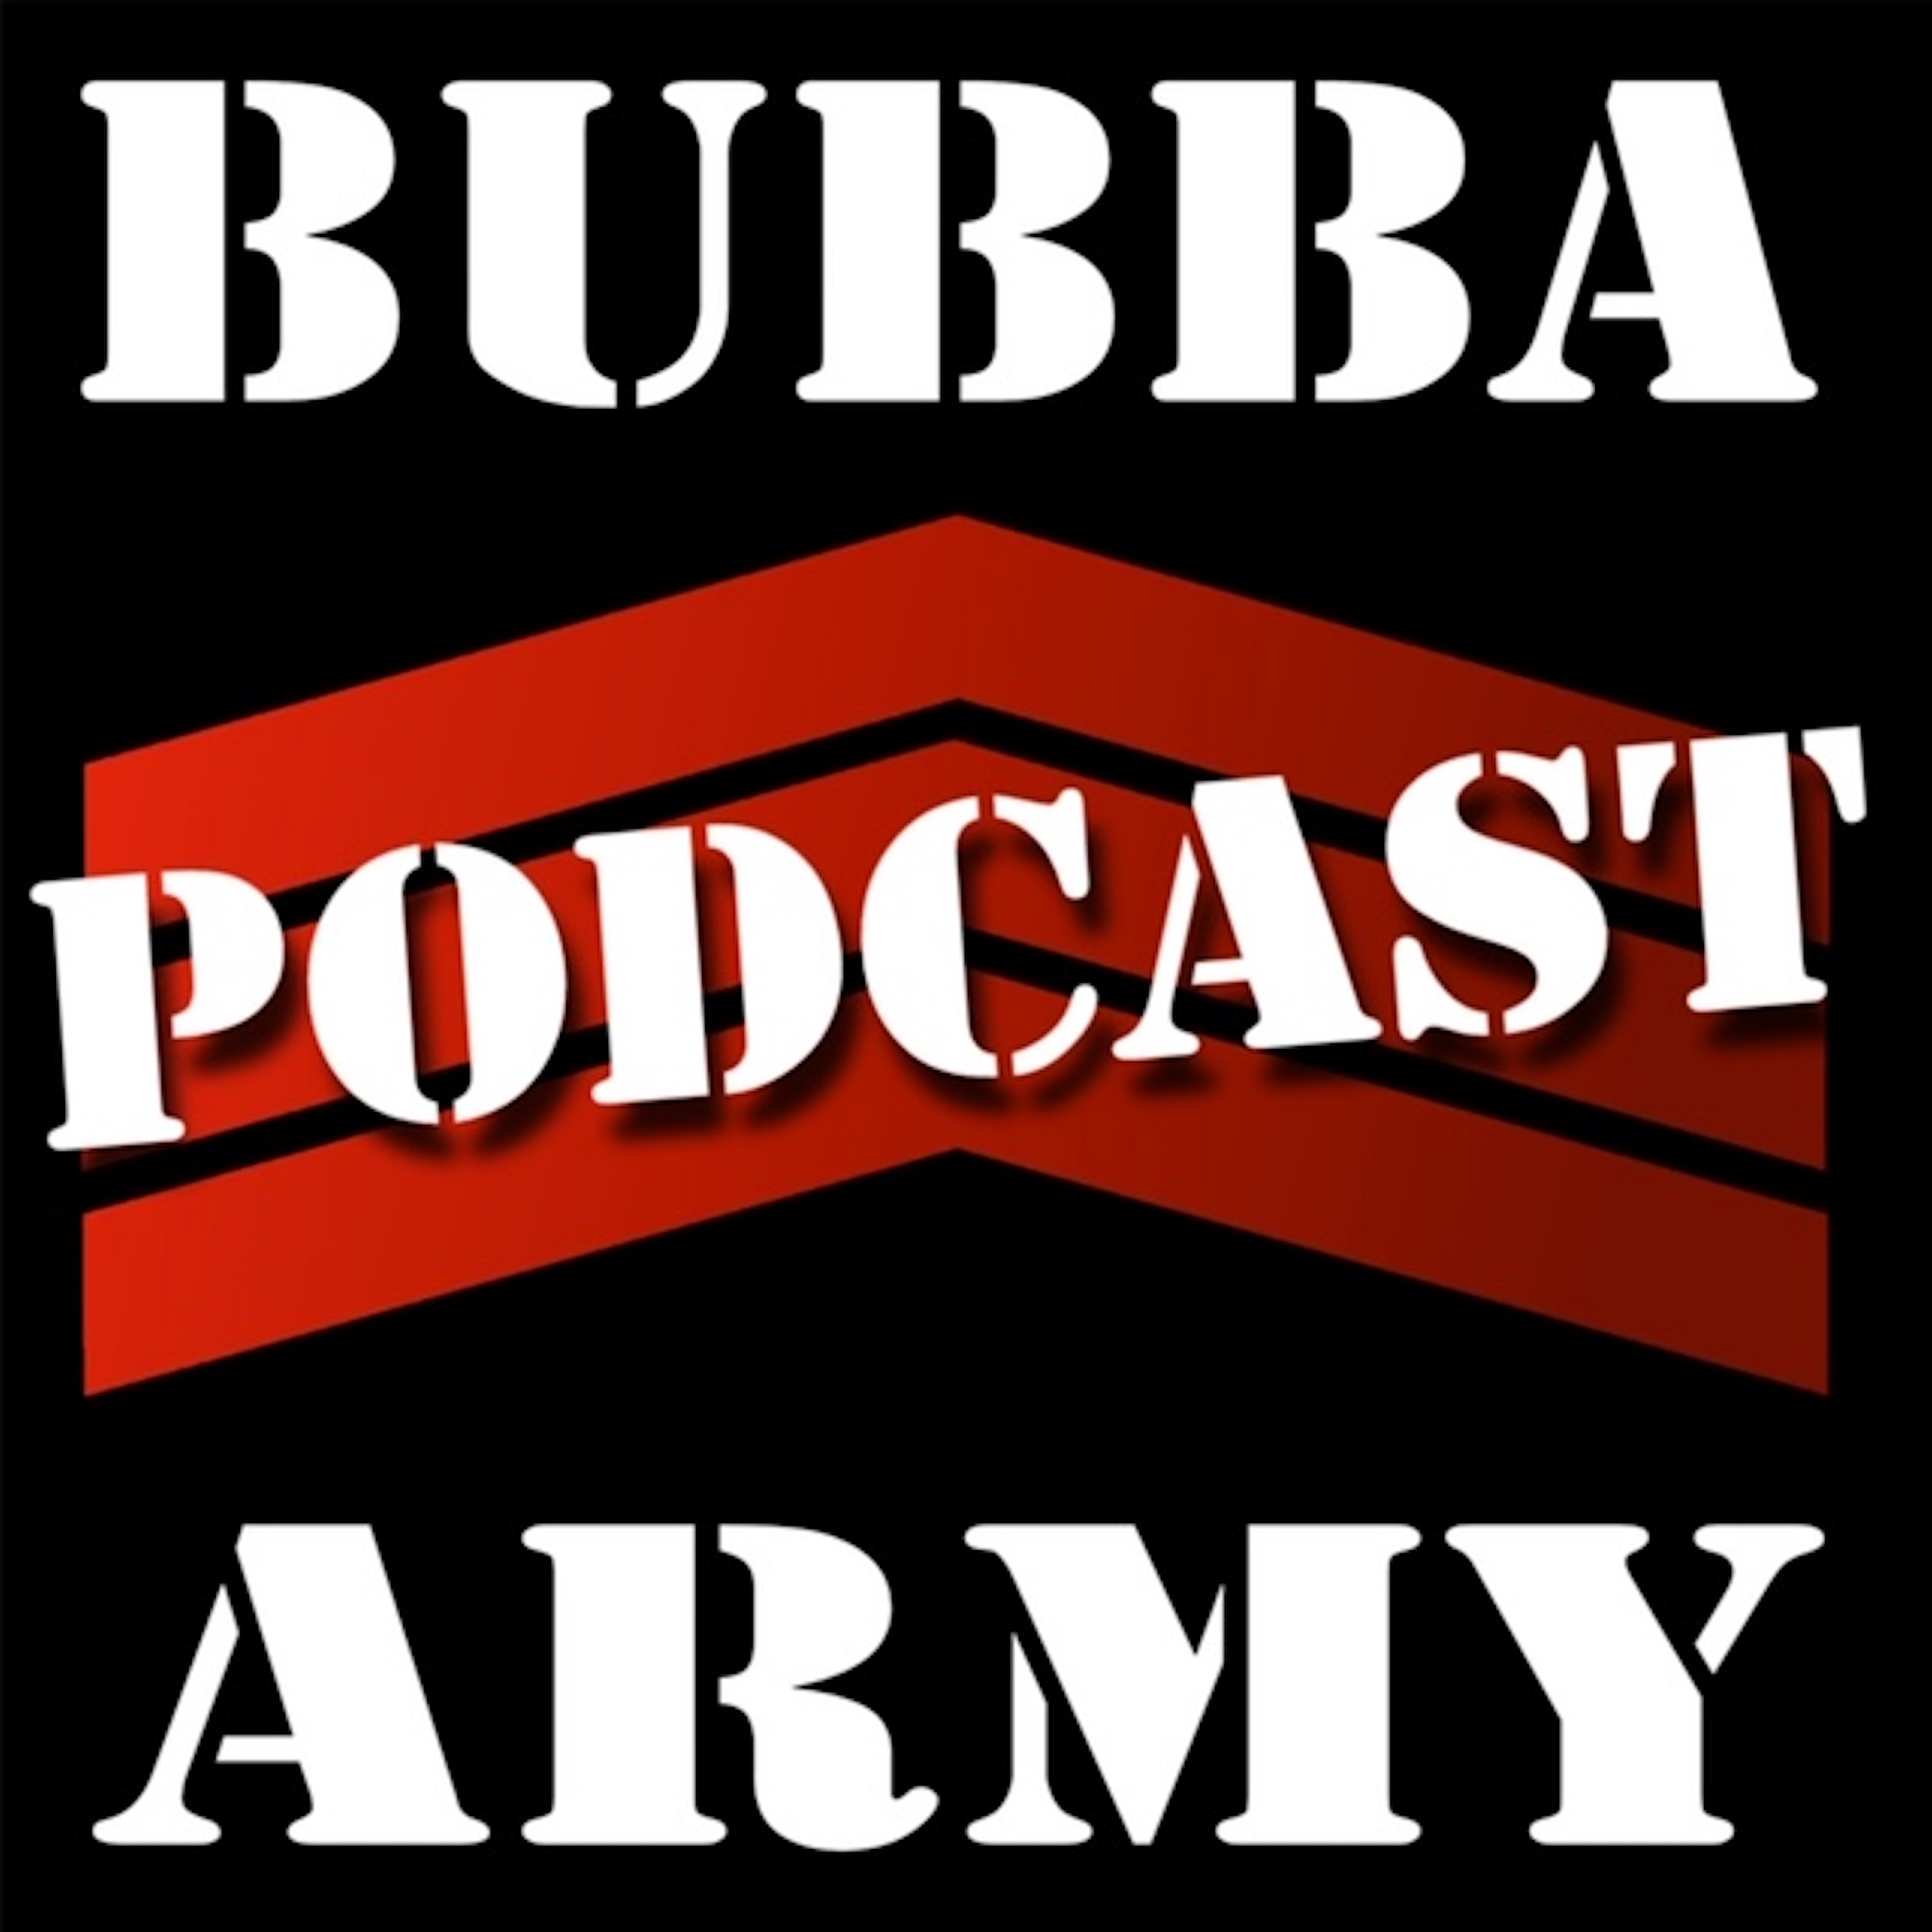 What is bubba army